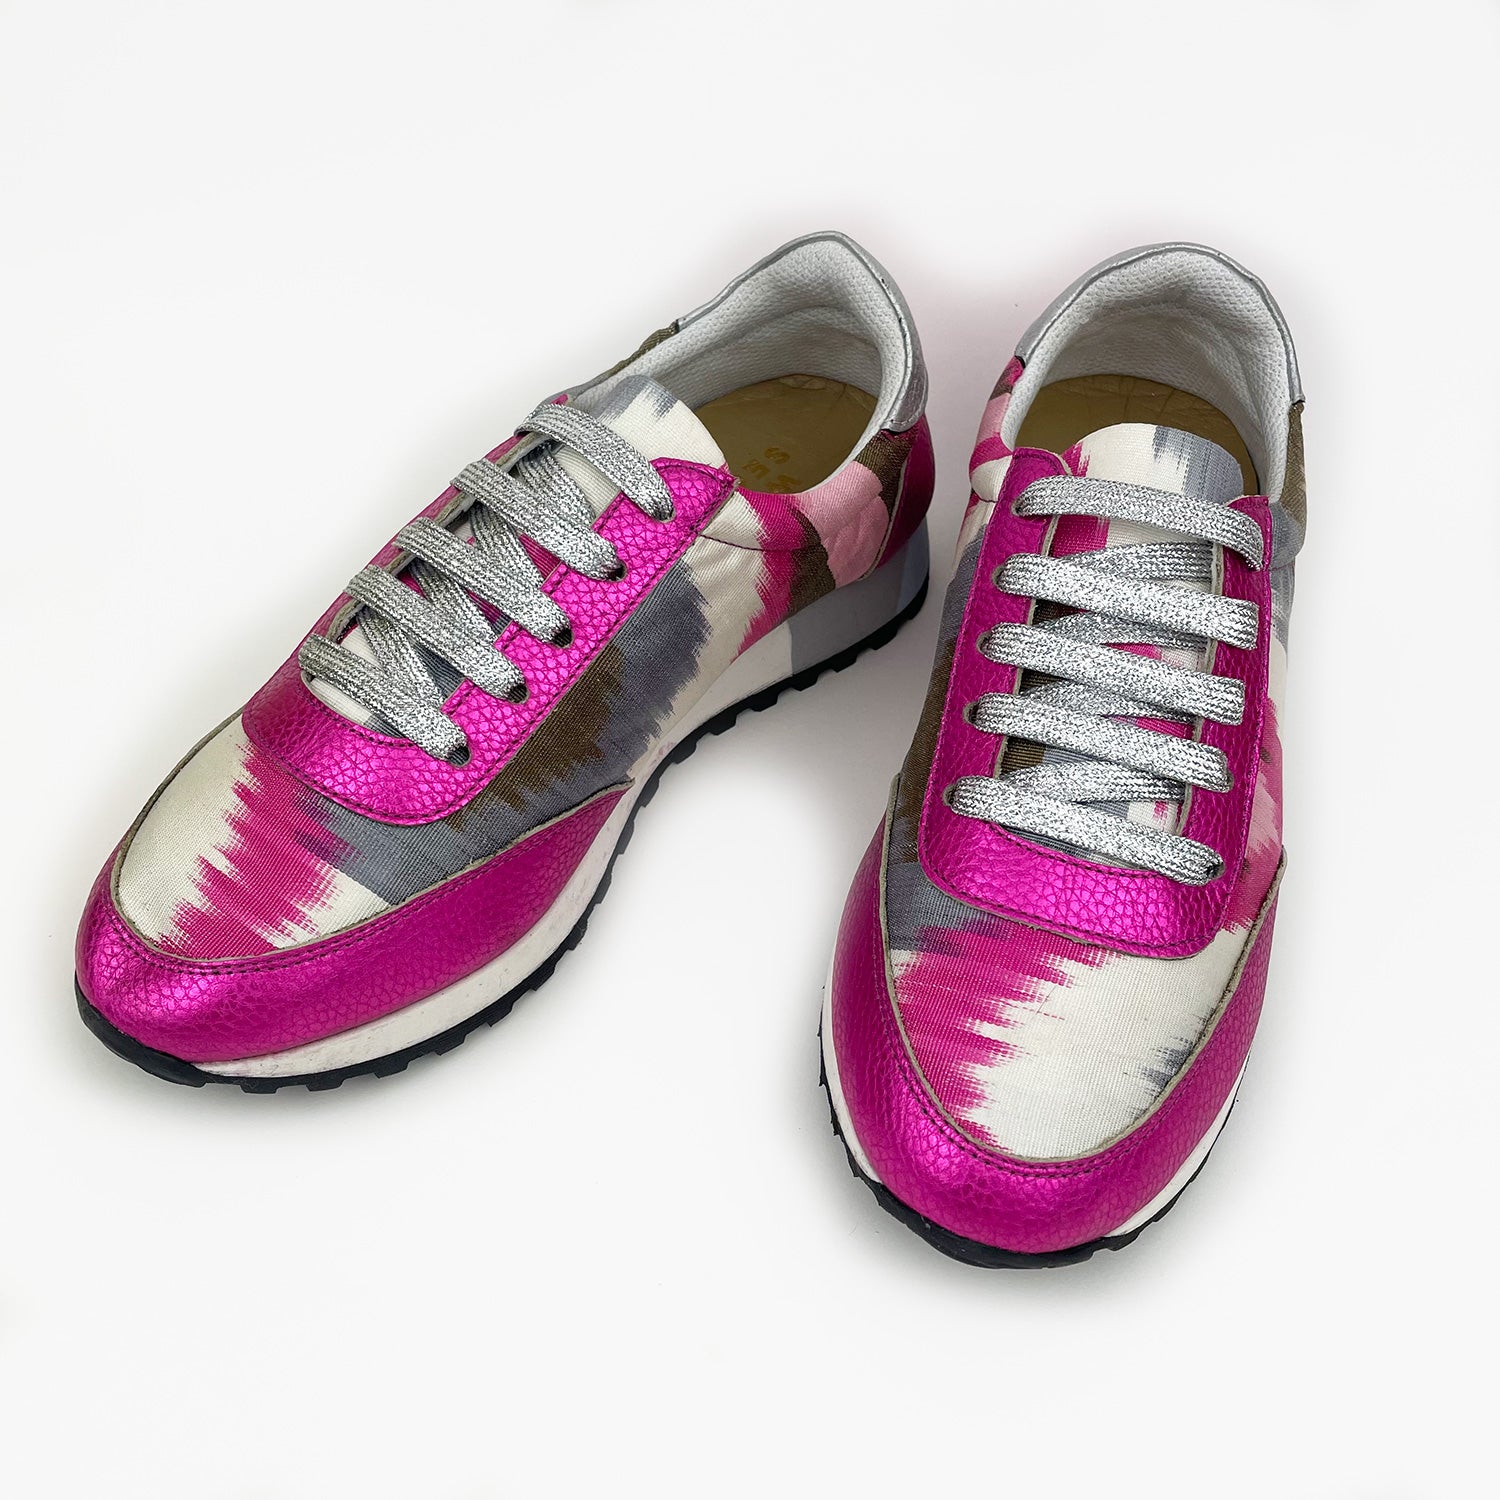 Pink, white, grey and green Ikat Silk trainers with pink metallic leather and silver glitter shoelaces